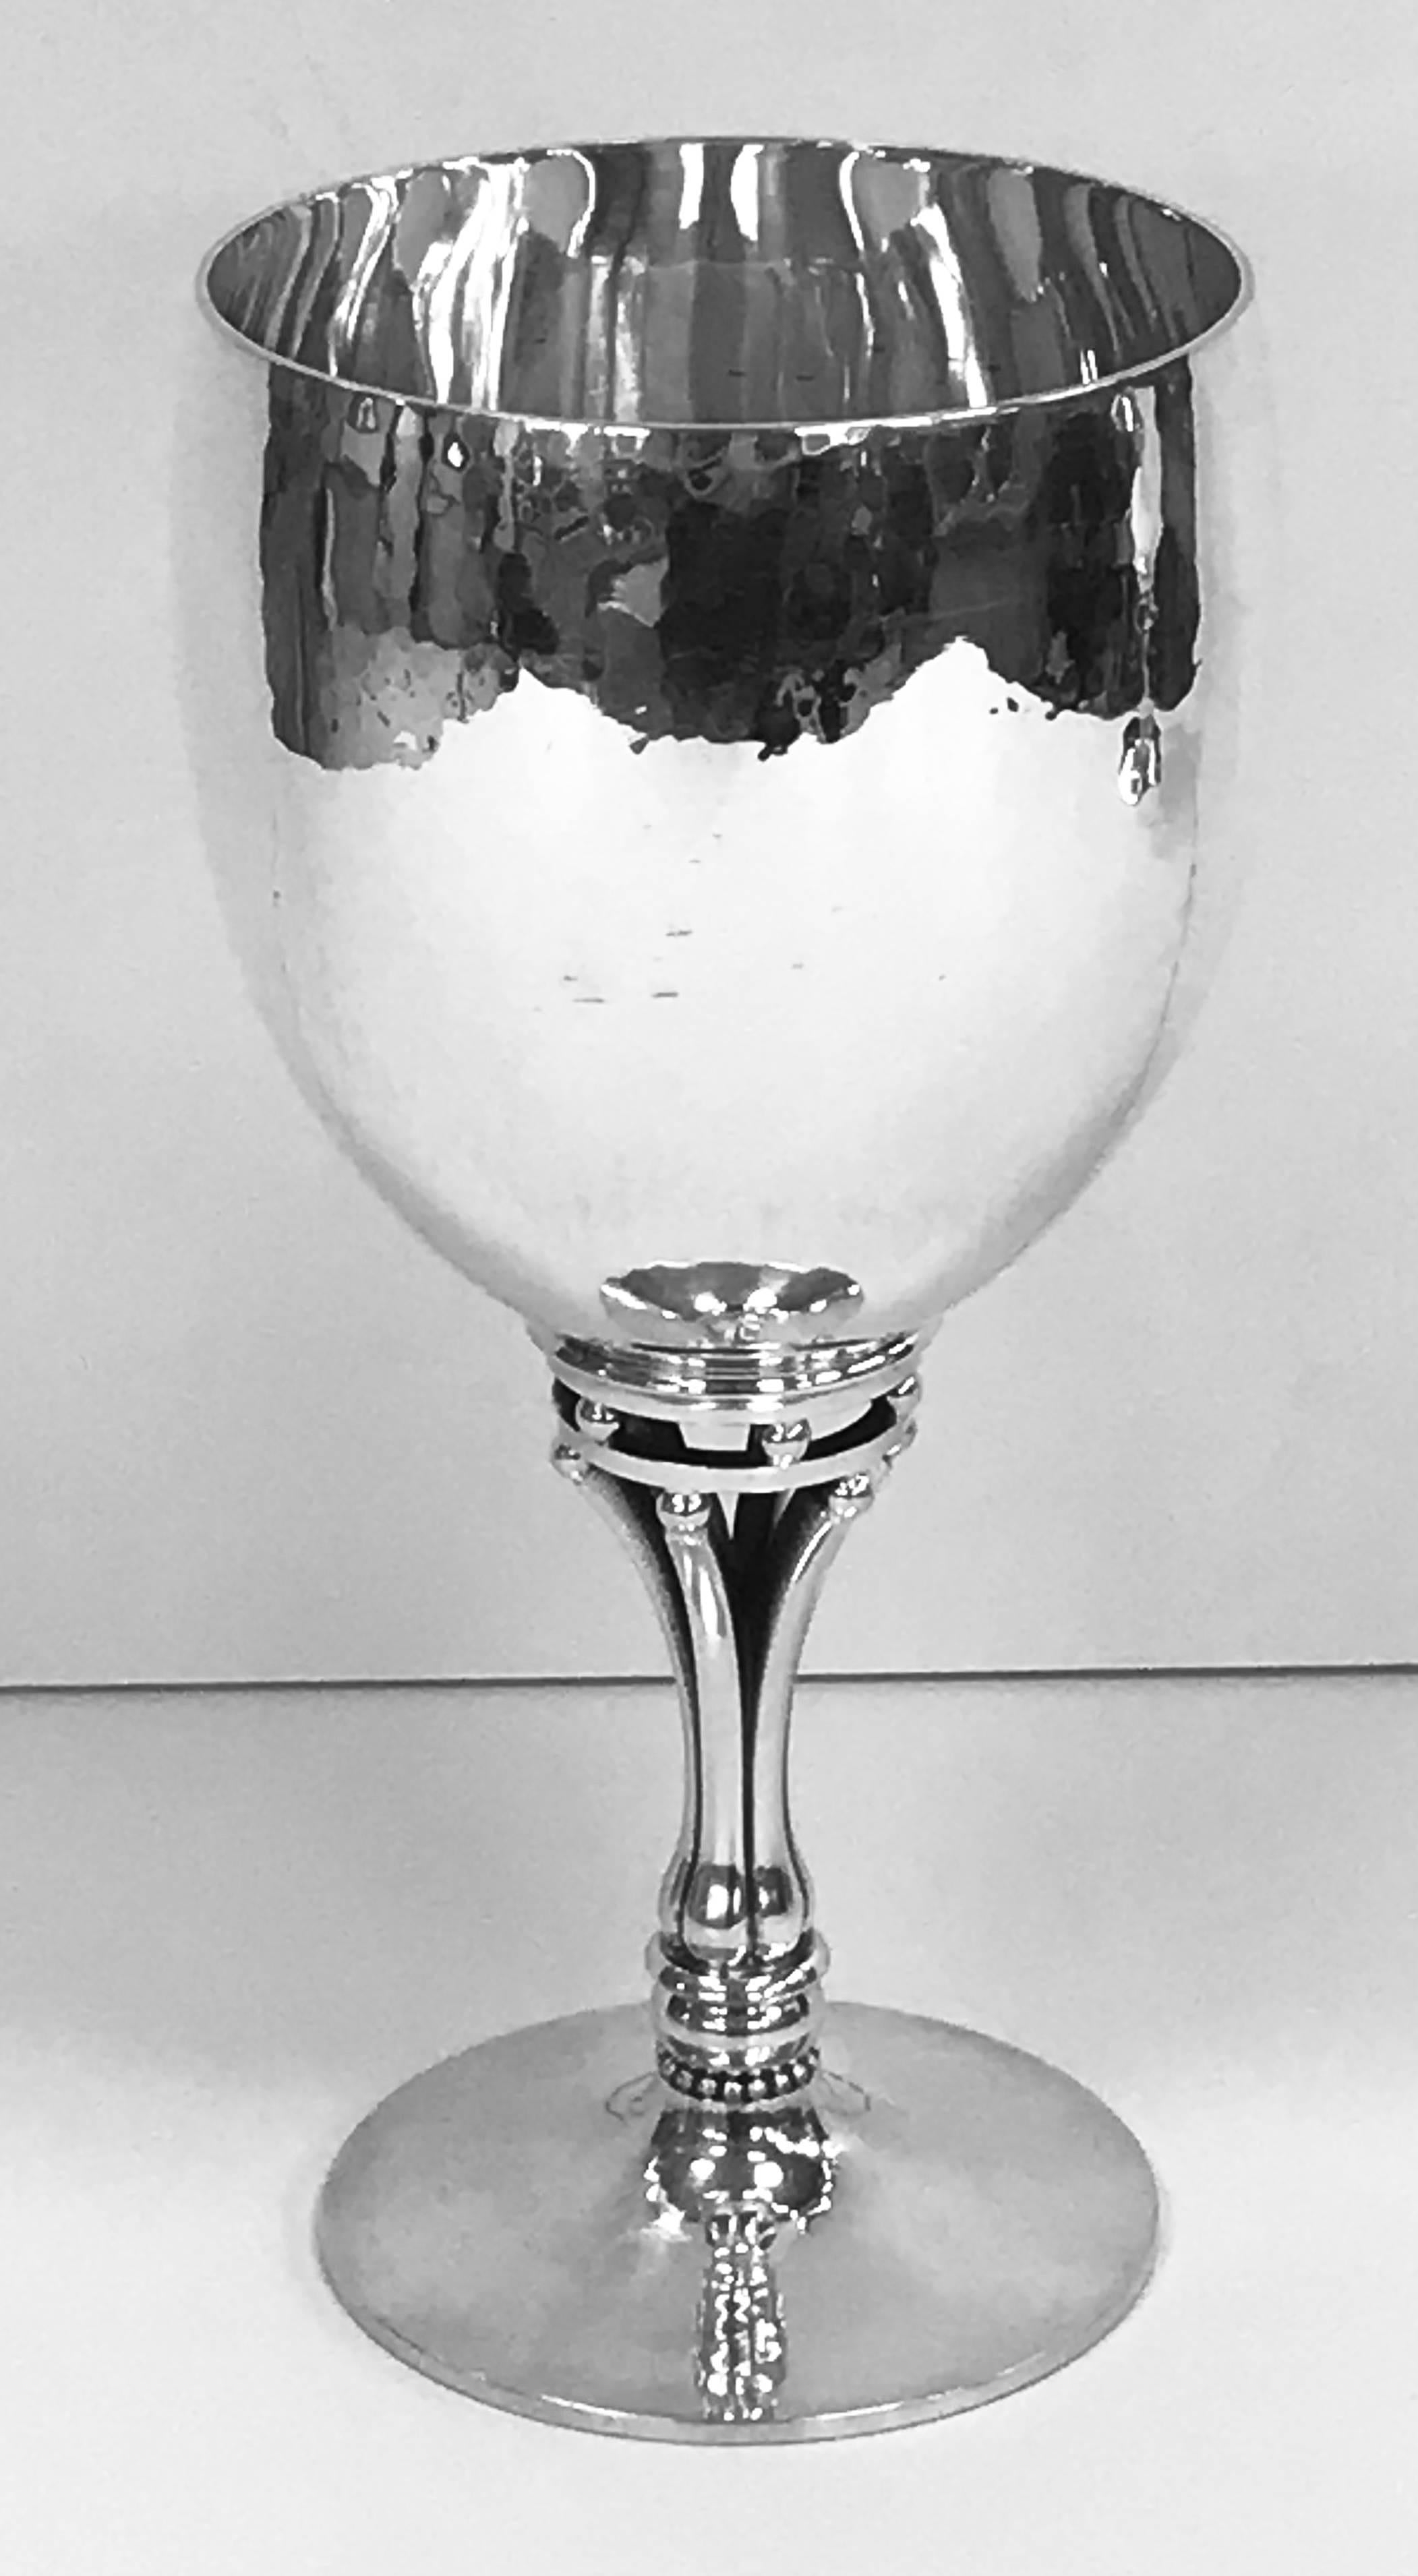 A pair of Georg Jensen silver goblets designed by Harald Nielsen.